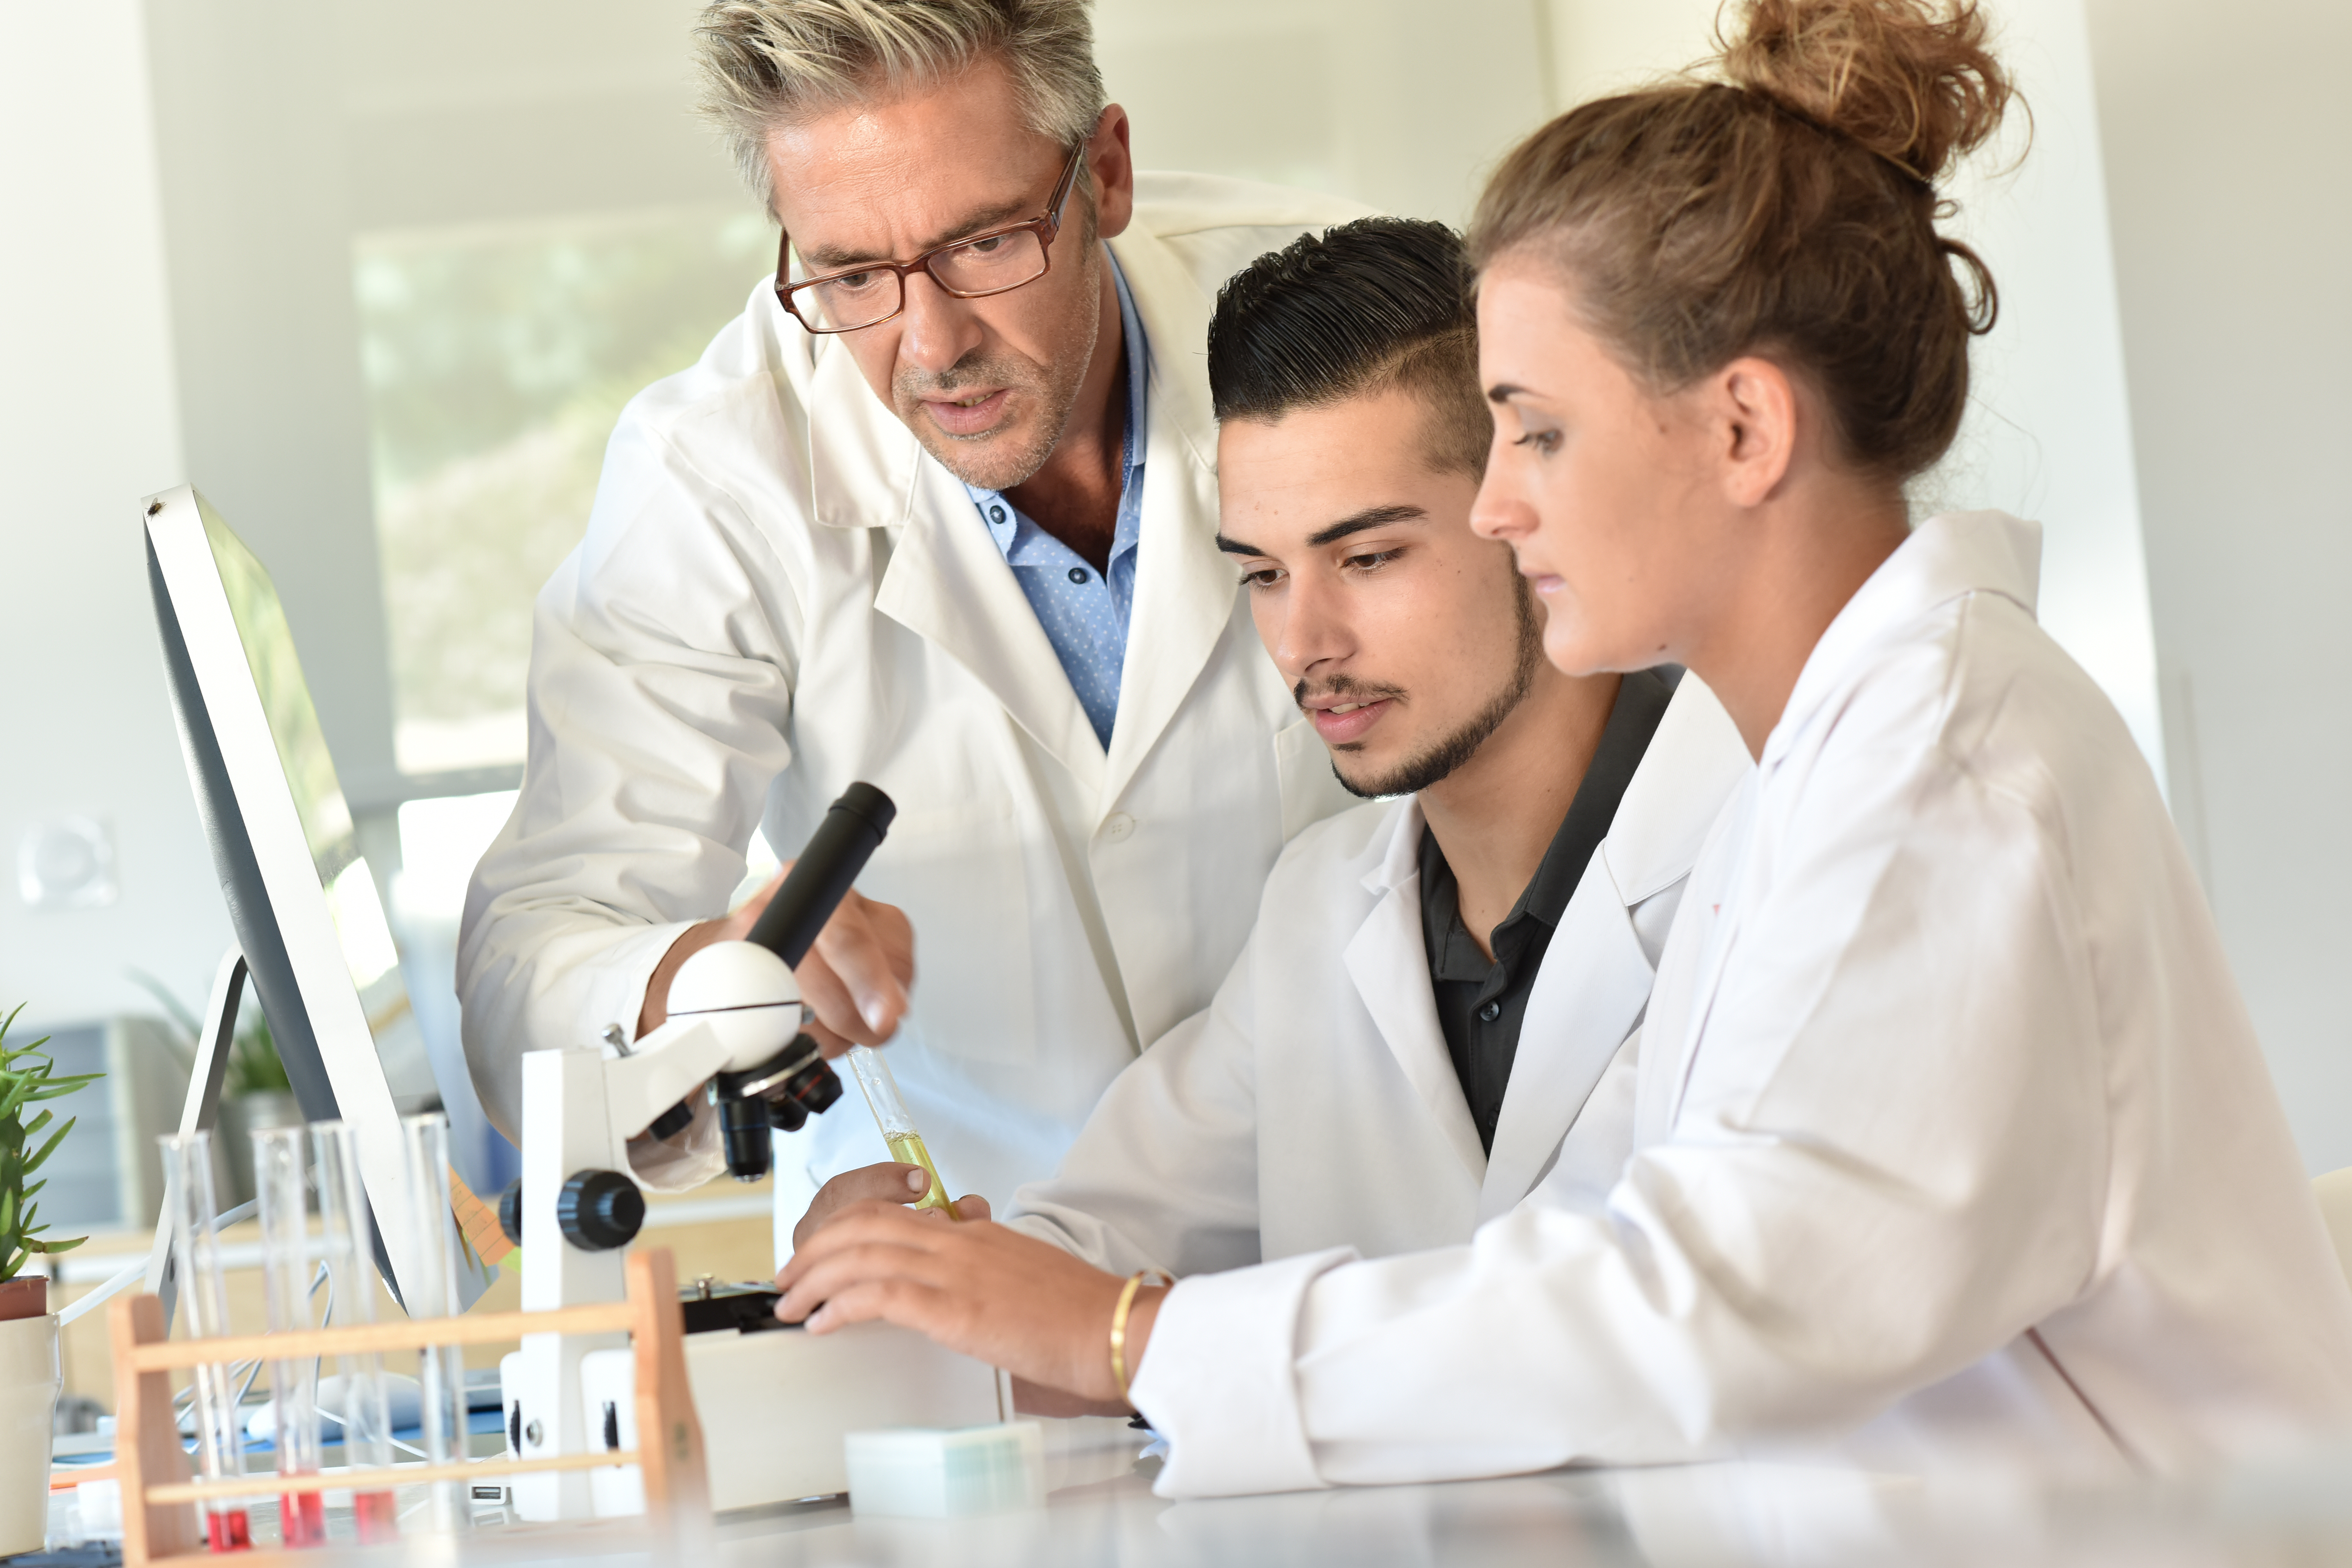 Teacher in a lab coat helping students in lab coats to use a microscope